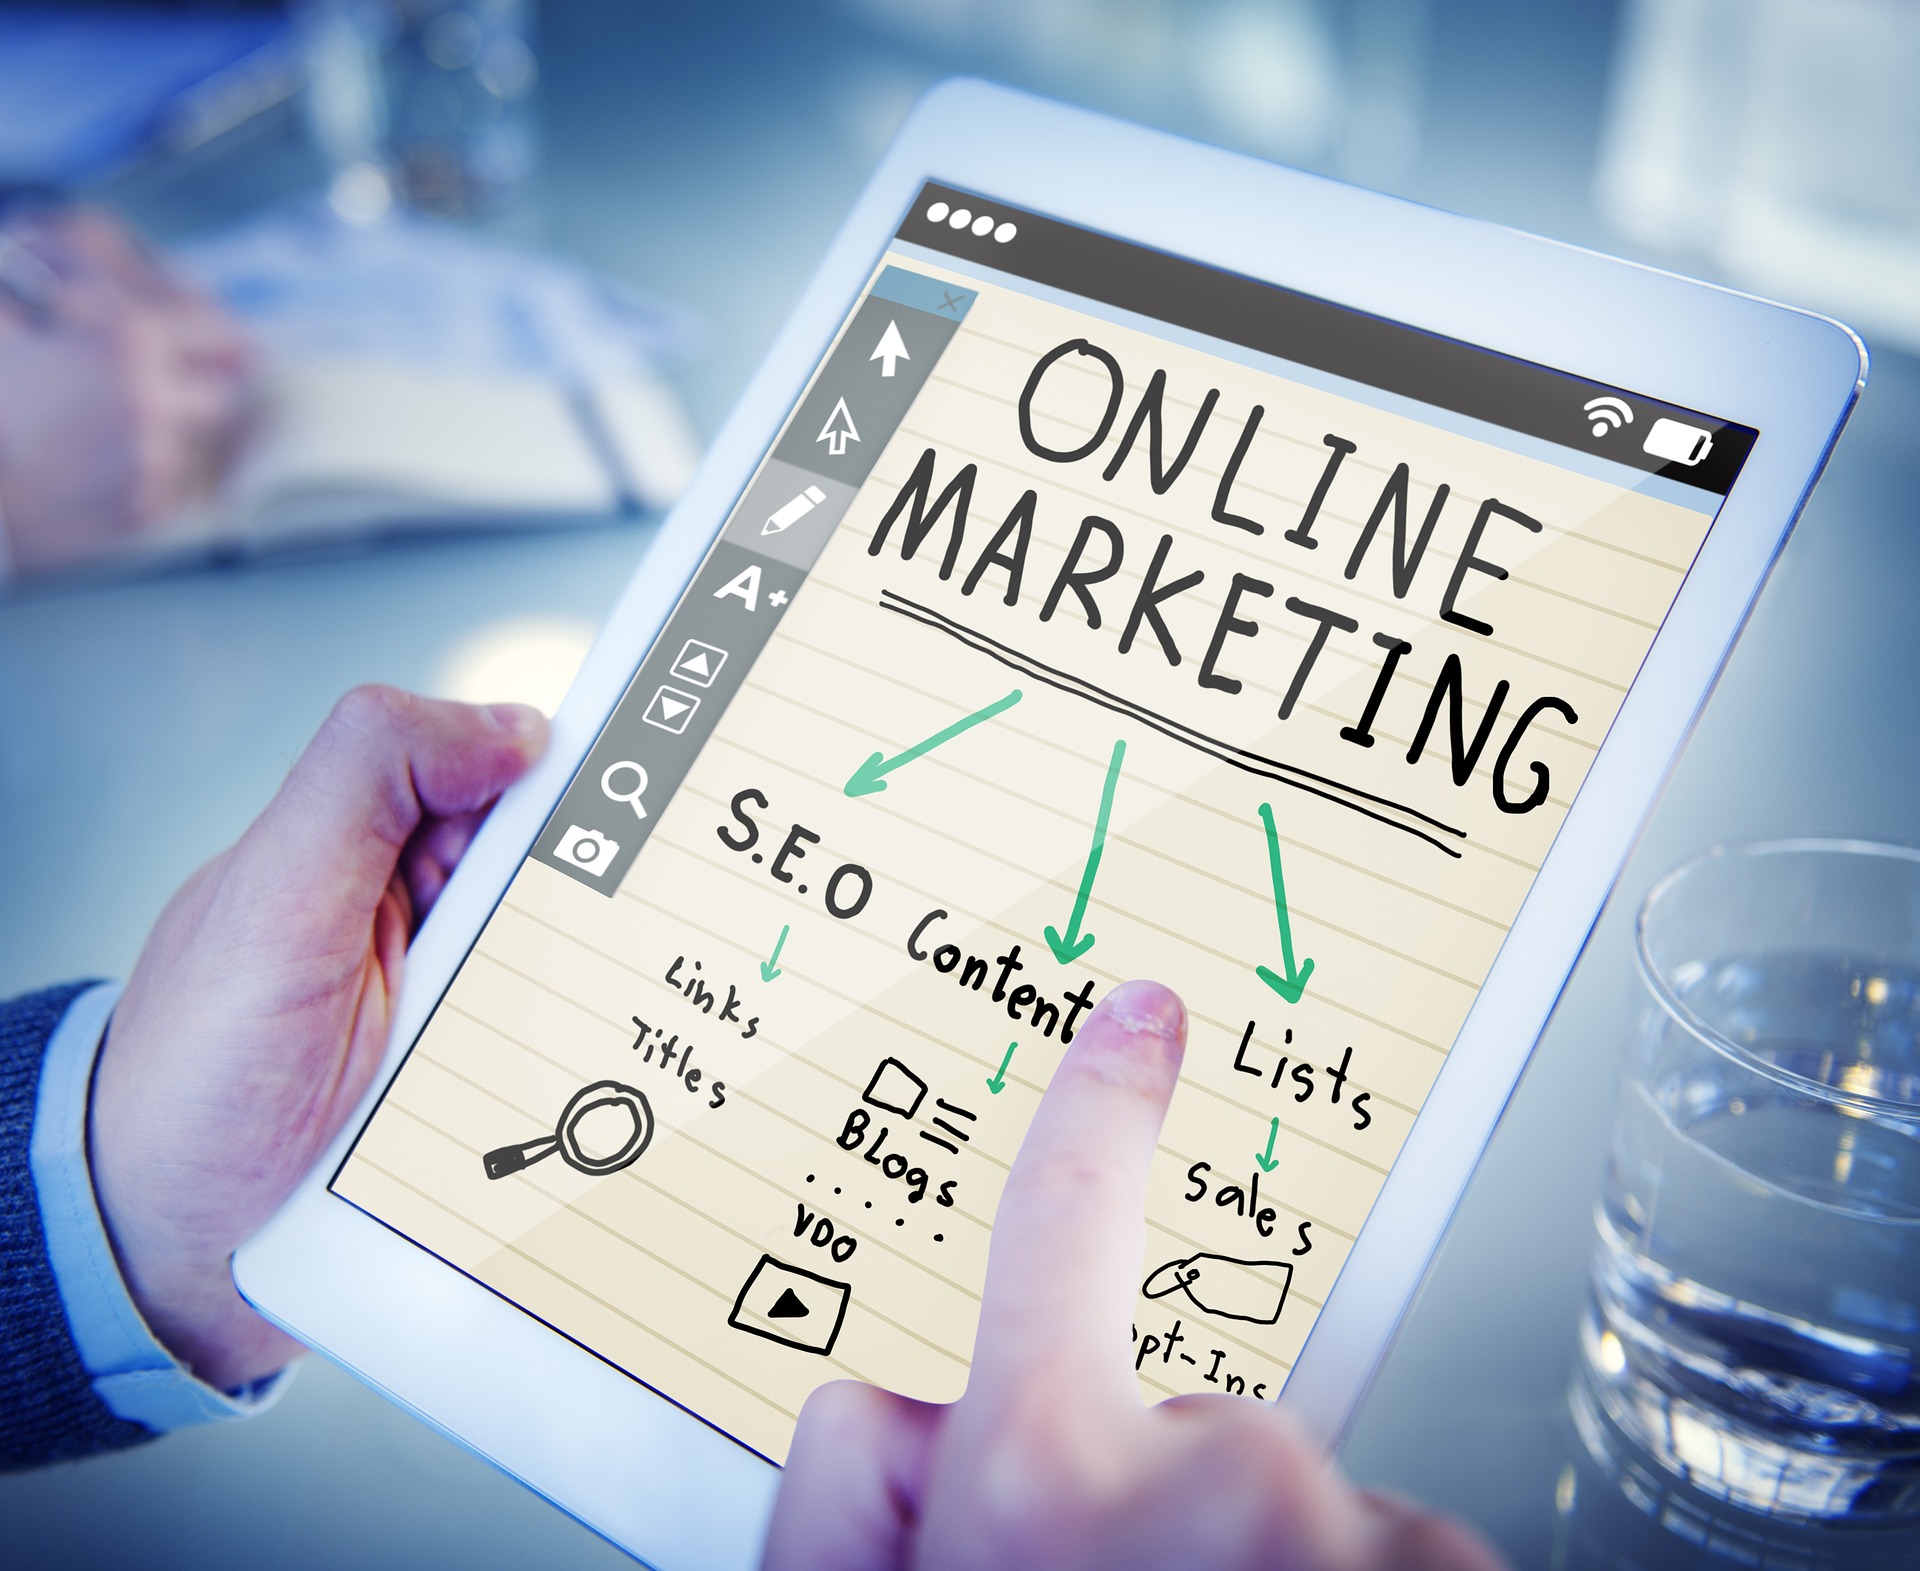 New Service For Online Digital Marketing Is Now Available For All Our Customers